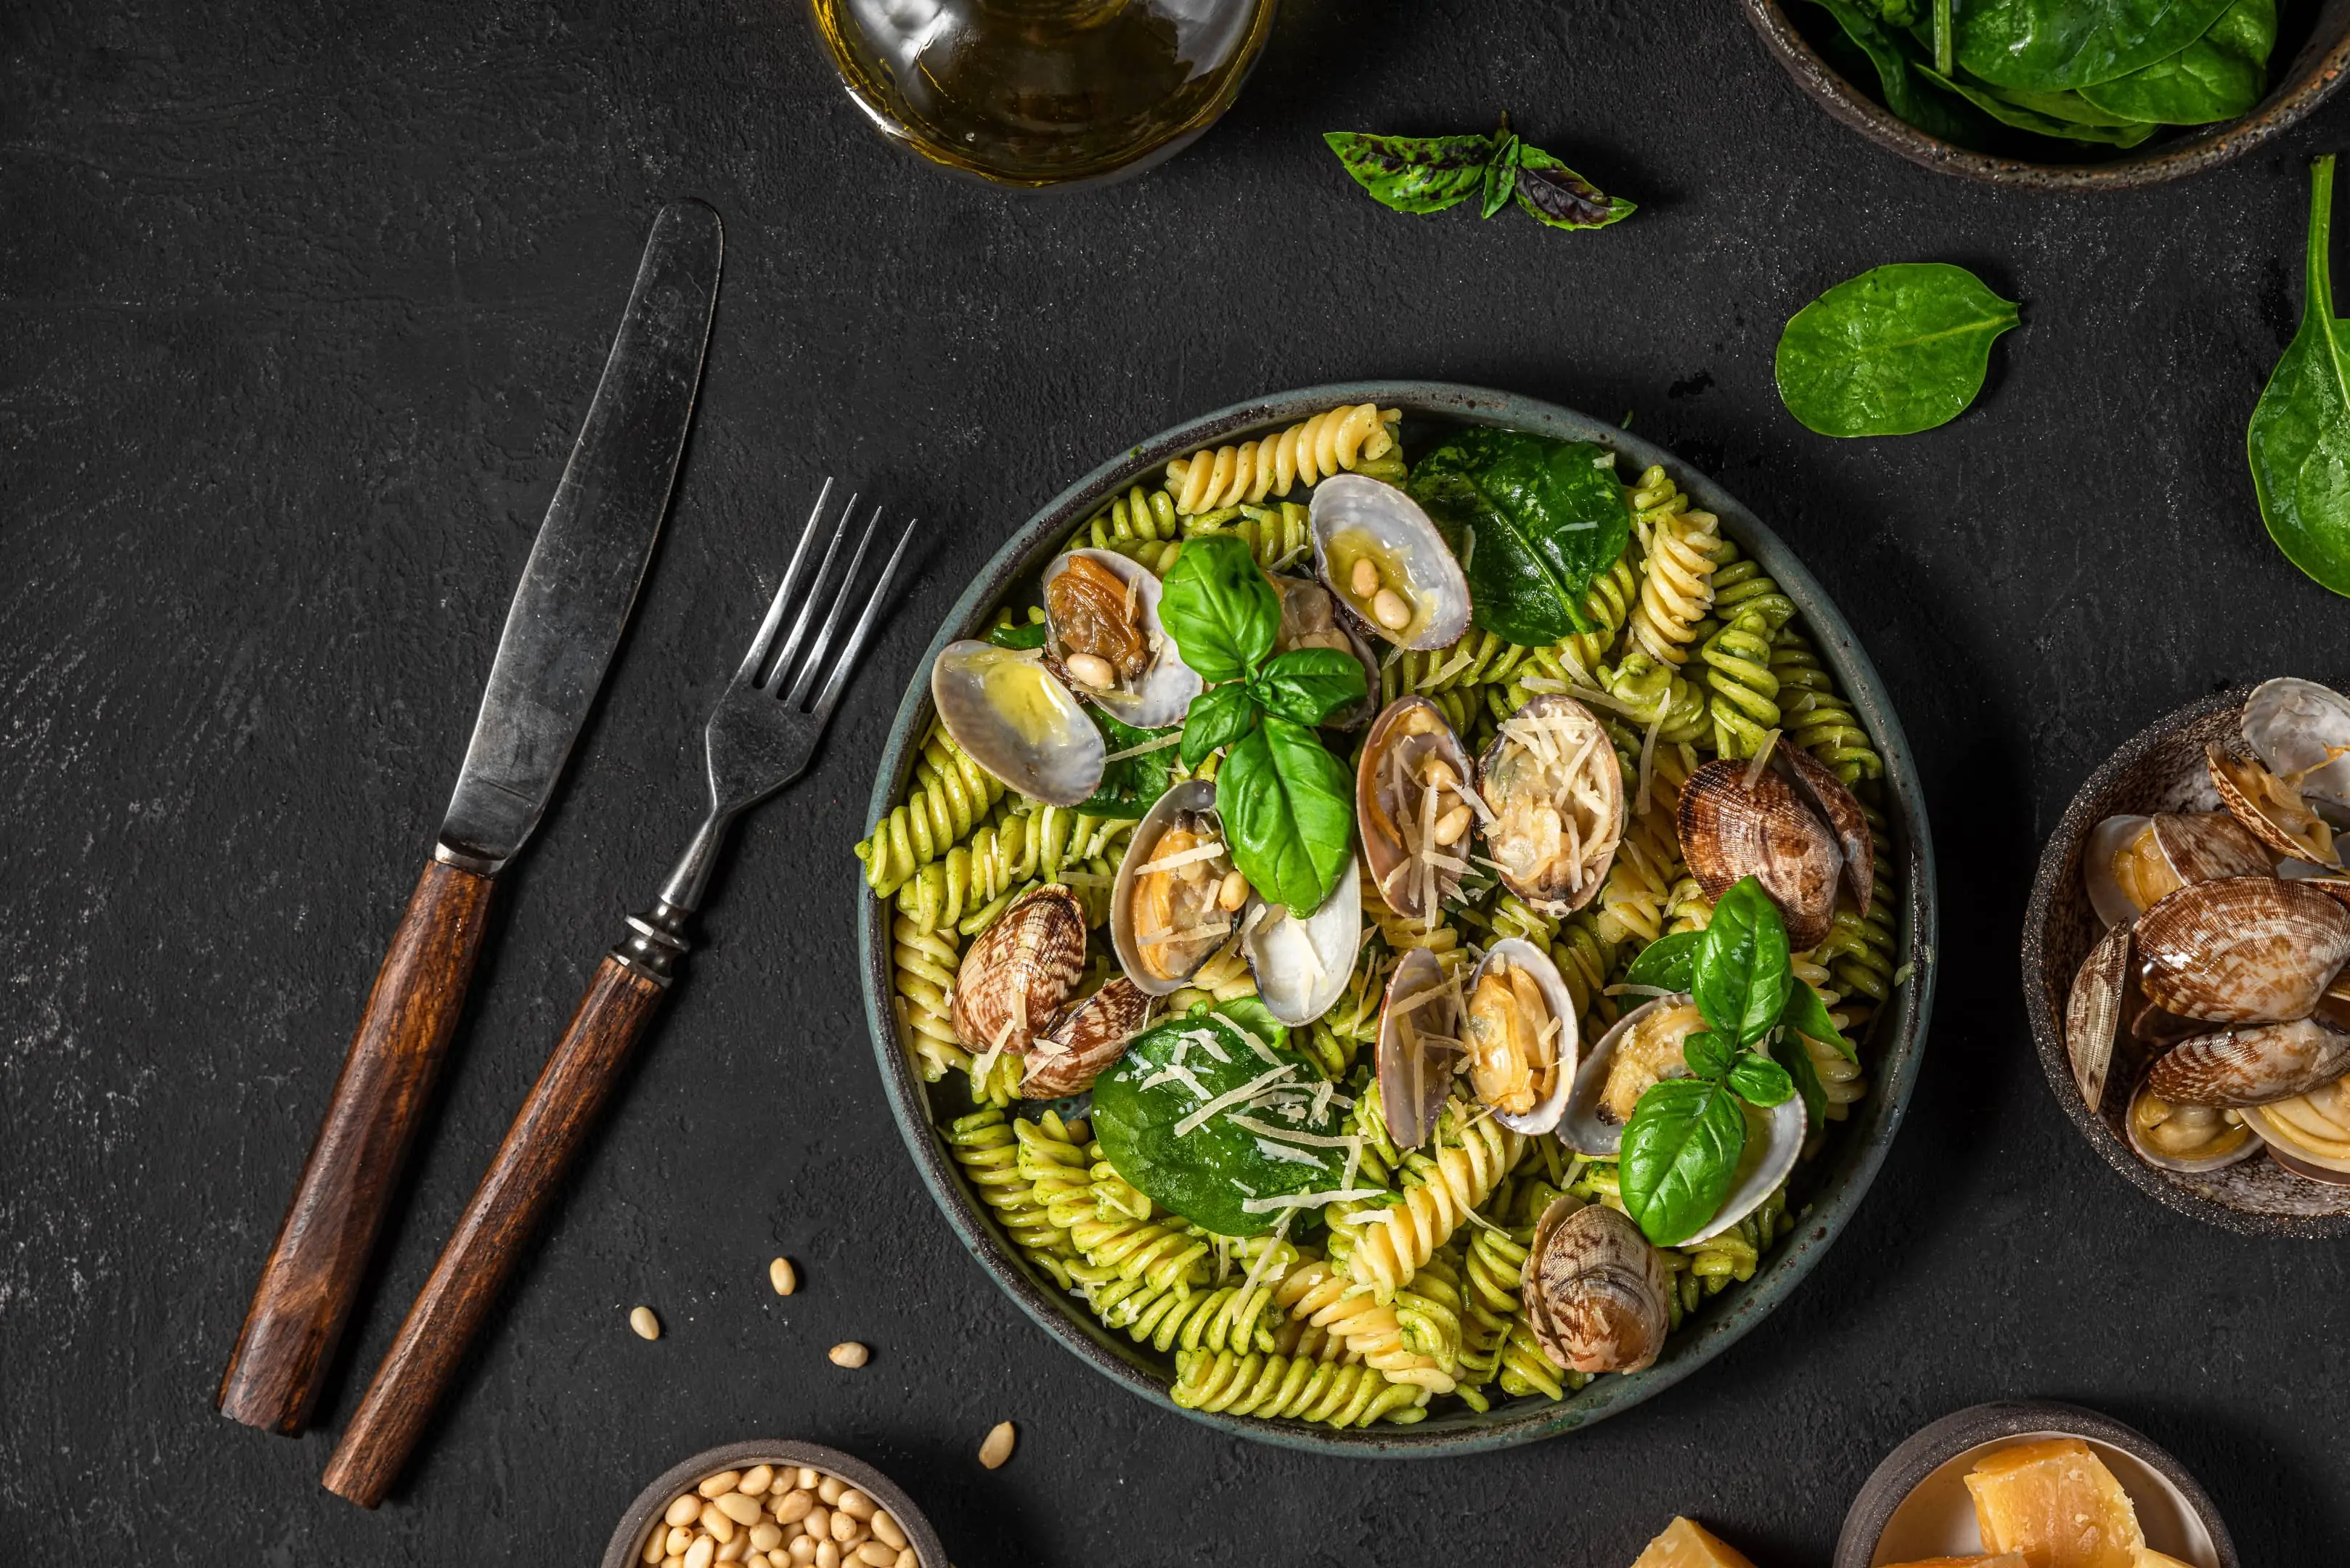 Seafood pasta with vongole clams, spinach parmesan cheese, pine nuts and basil